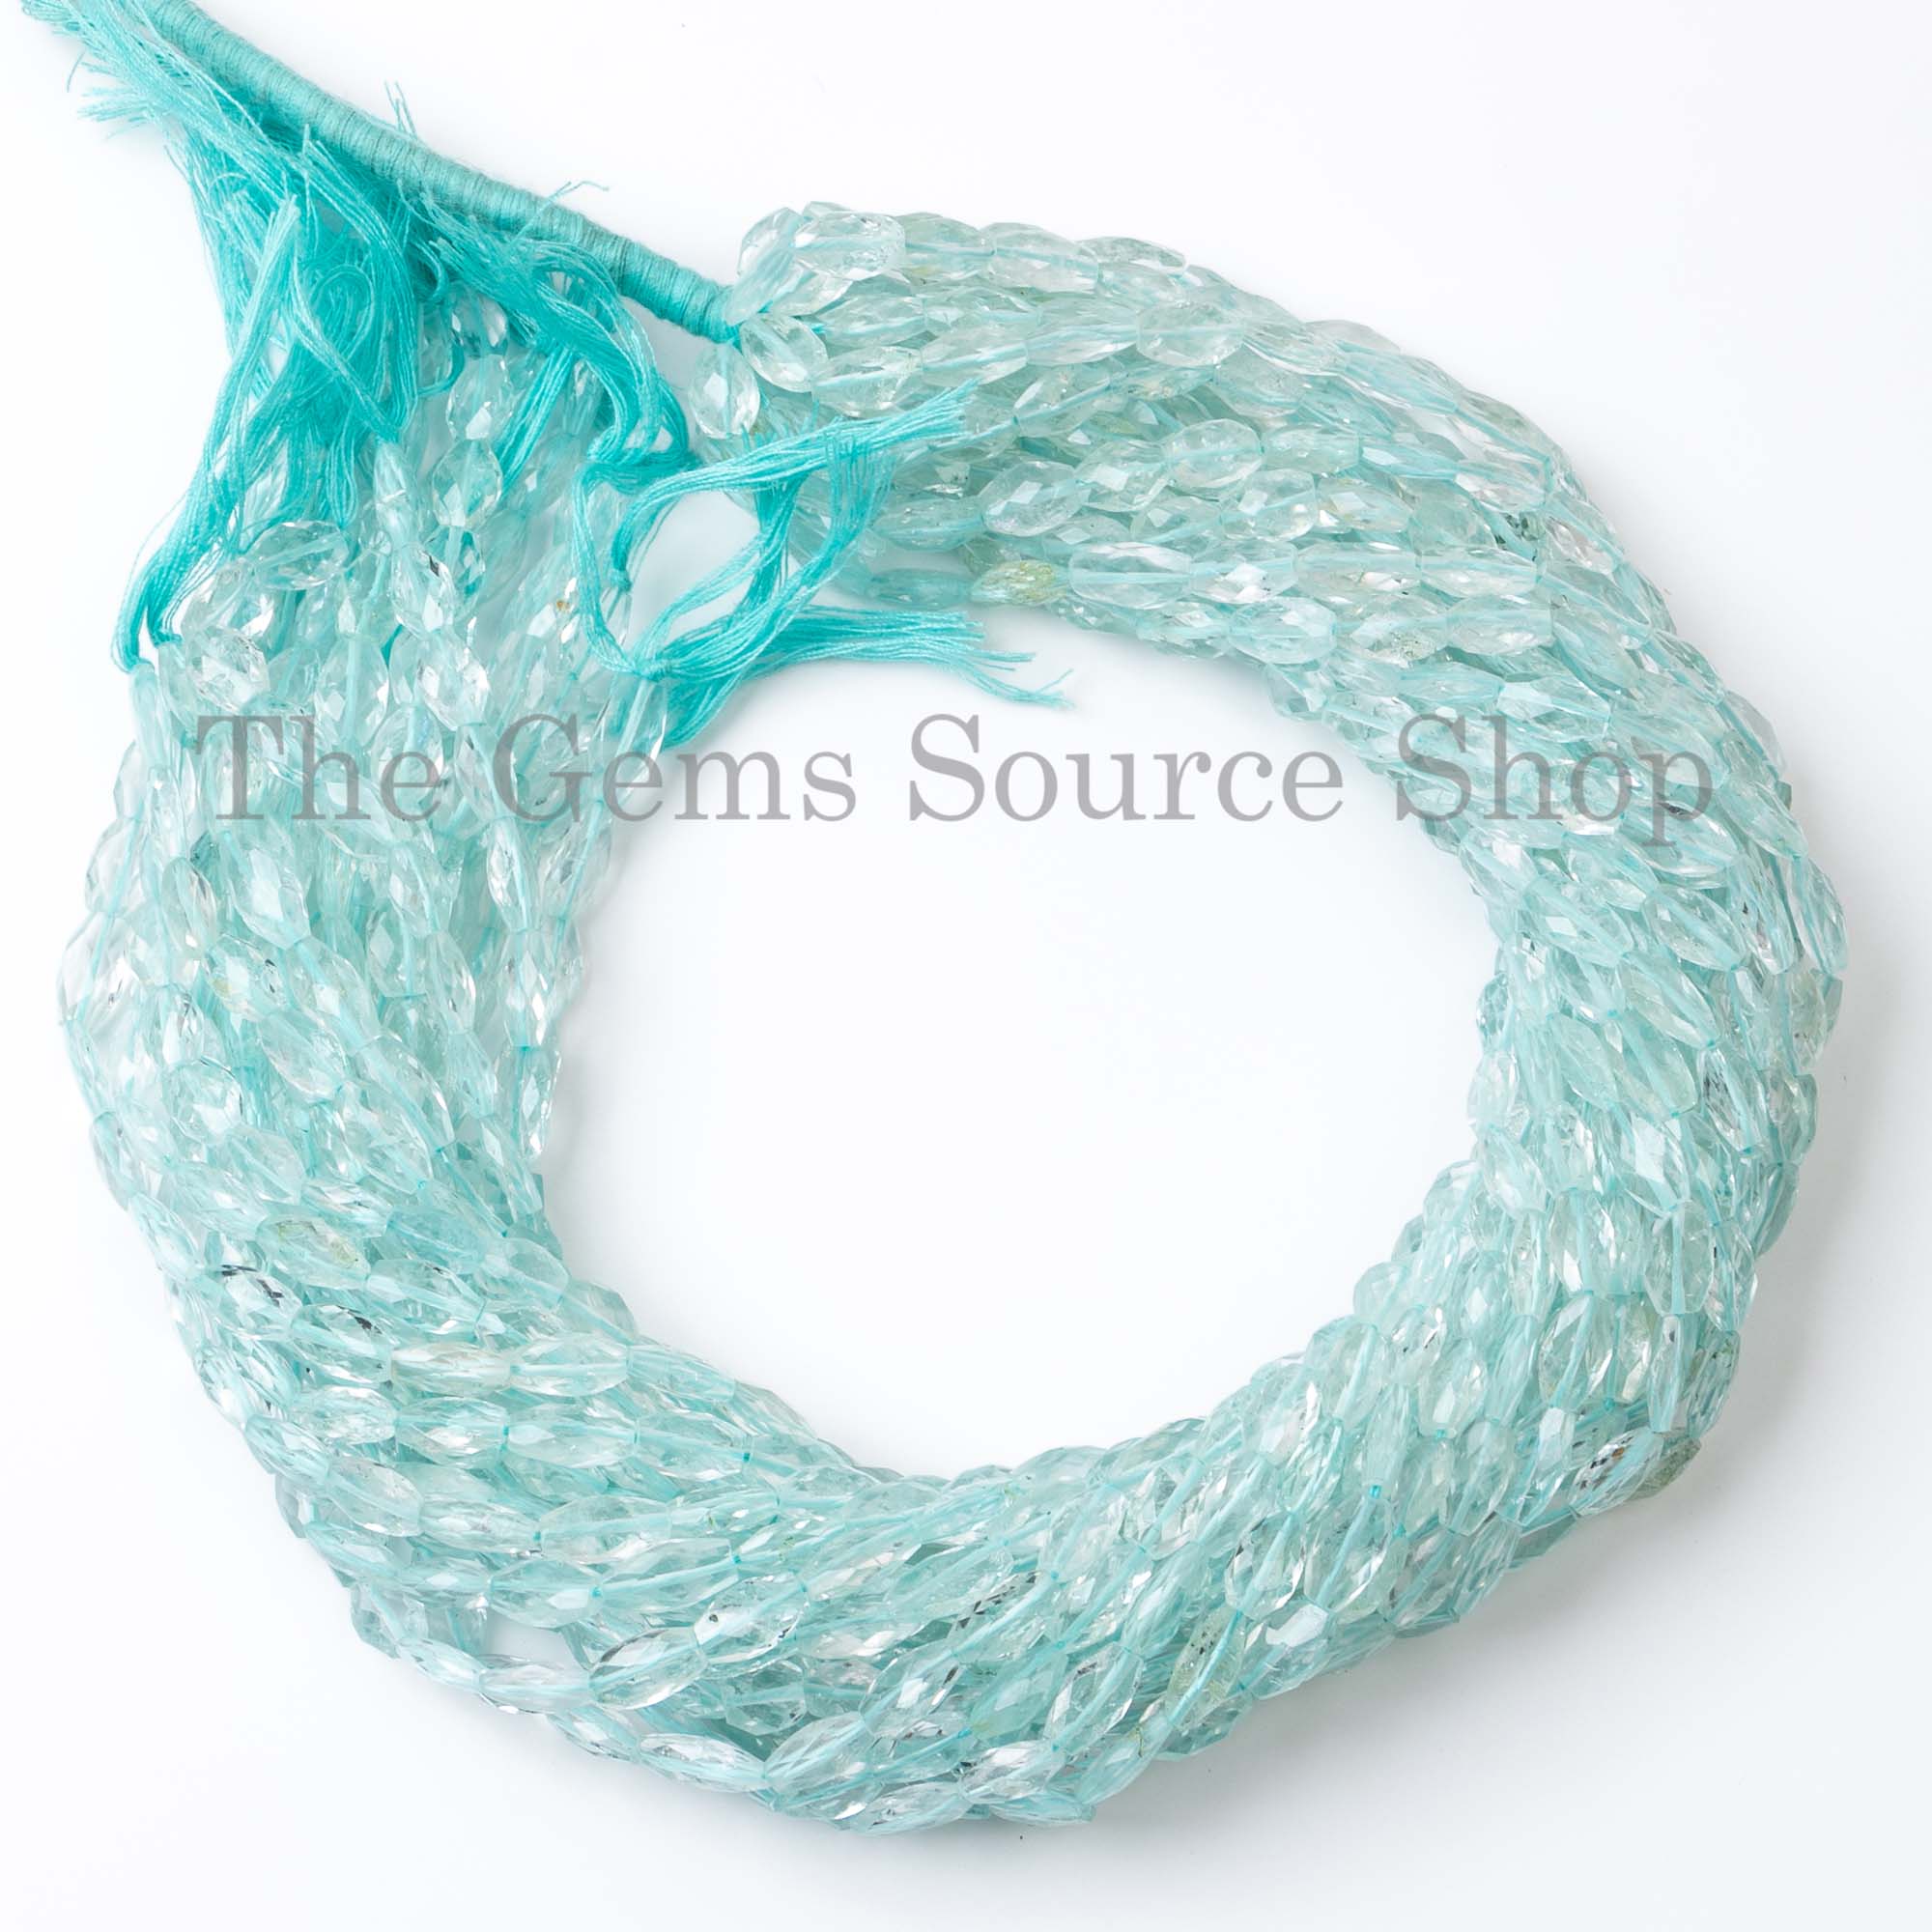 Natural Aquamarine Faceted Oval Beads, Wholesale Aquamarine Beads, Gemstone Beads